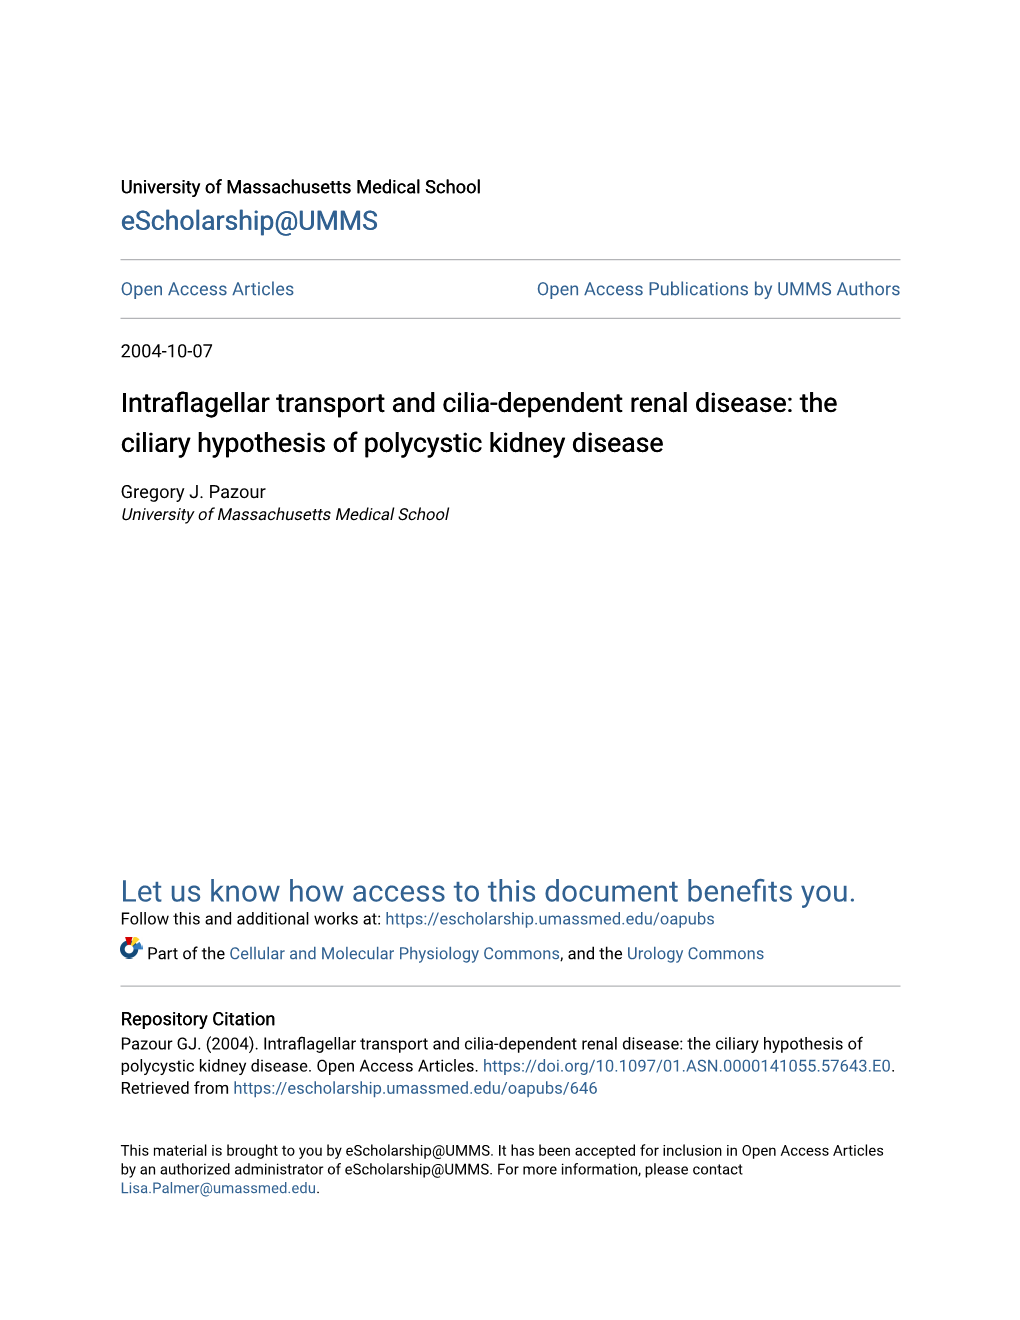 Intraflagellar Transport and Cilia-Dependent Renal Disease: the Ciliary Hypothesis of Polycystic Kidney Disease